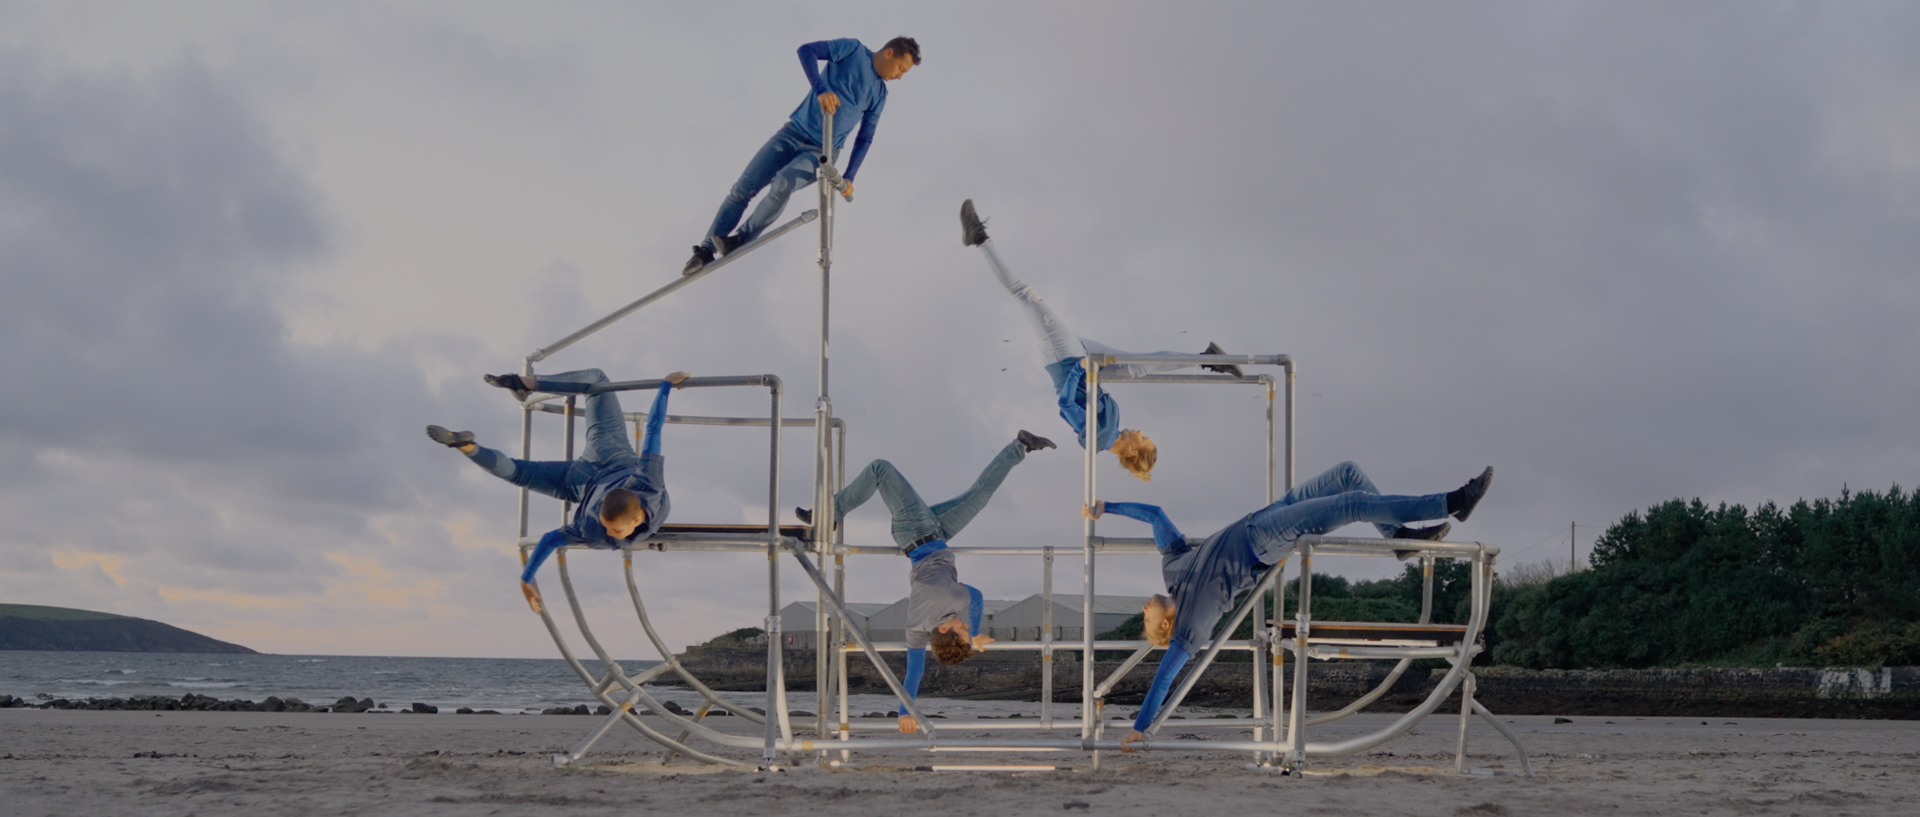 five dancers moving a metal shaped boat scaffolding structure on a beach. All wearing blue and grey outfits